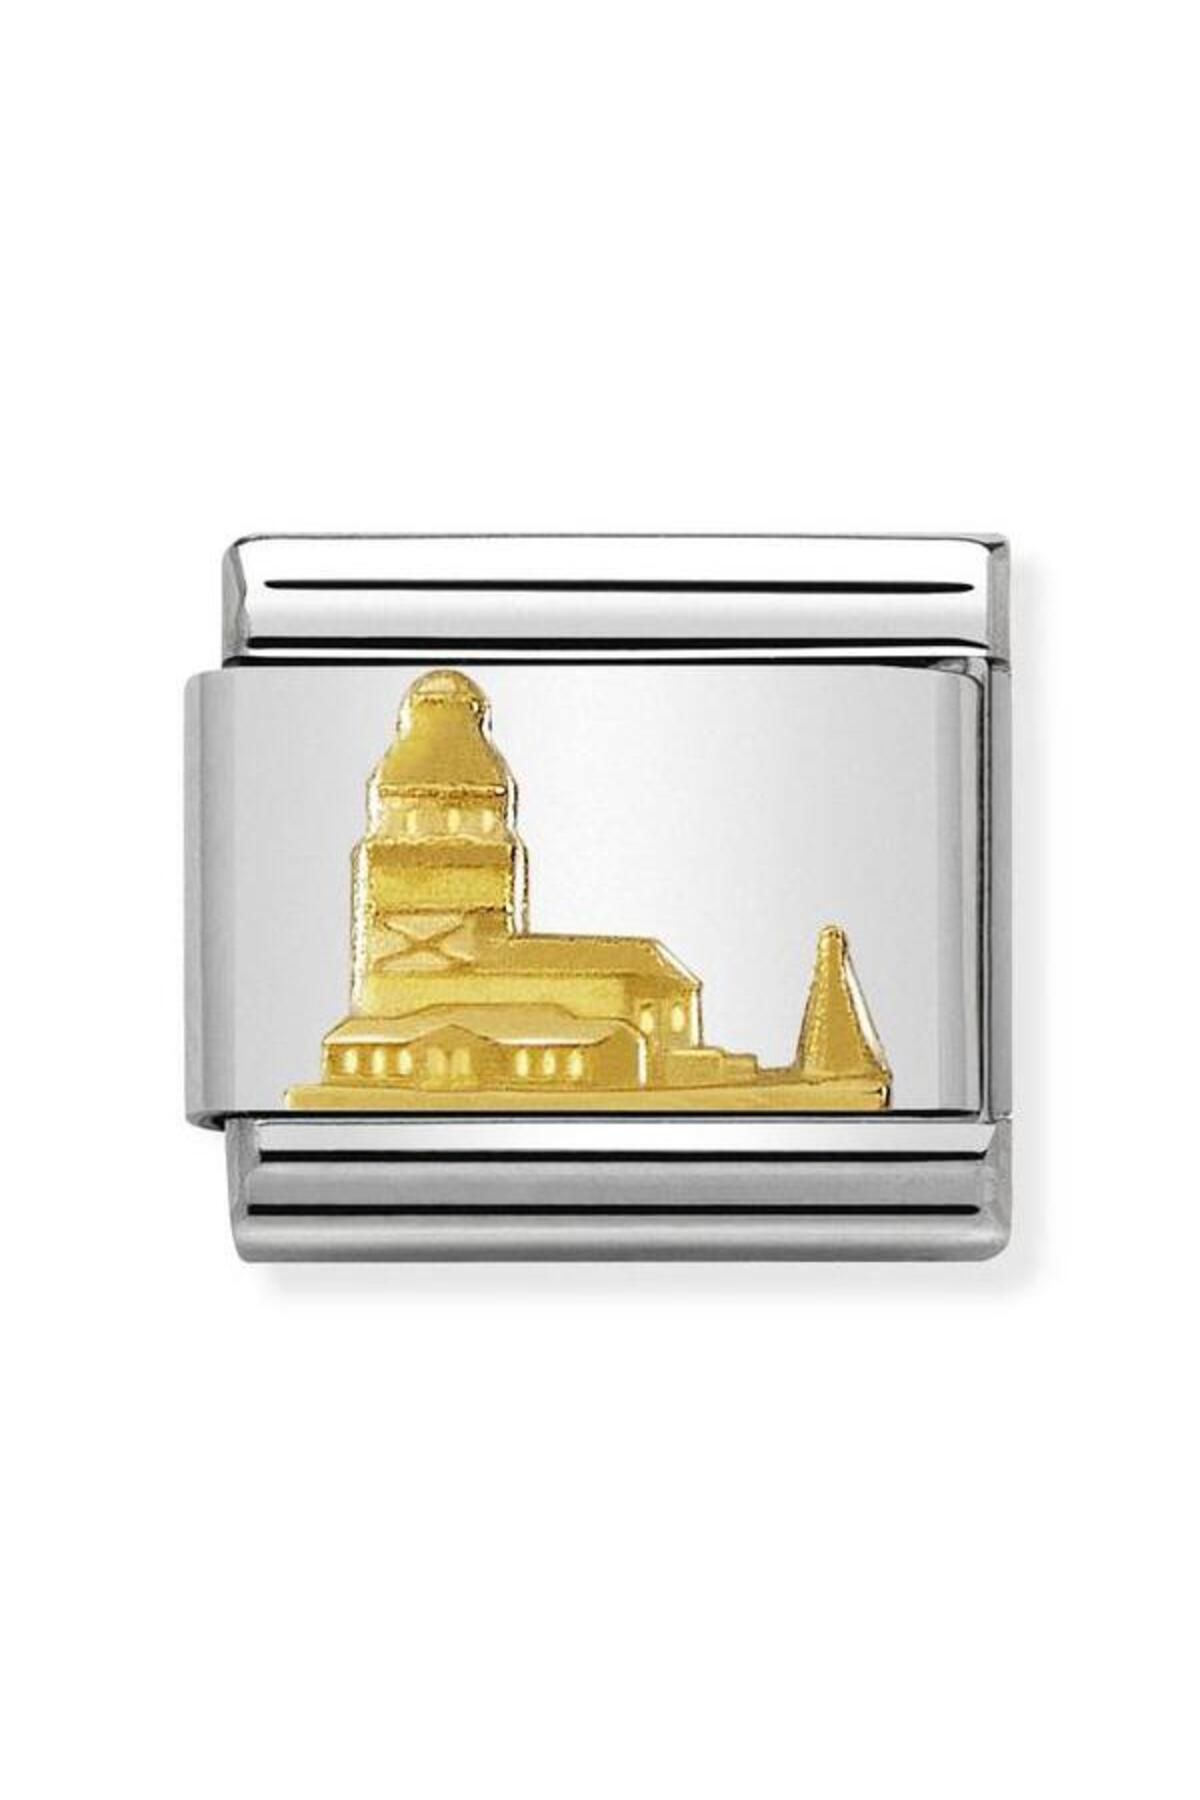 NOMİNATİON Composable Classic Monument Relıef 2 In Stainless Steel With 18k Gold (04_maiden Tower)